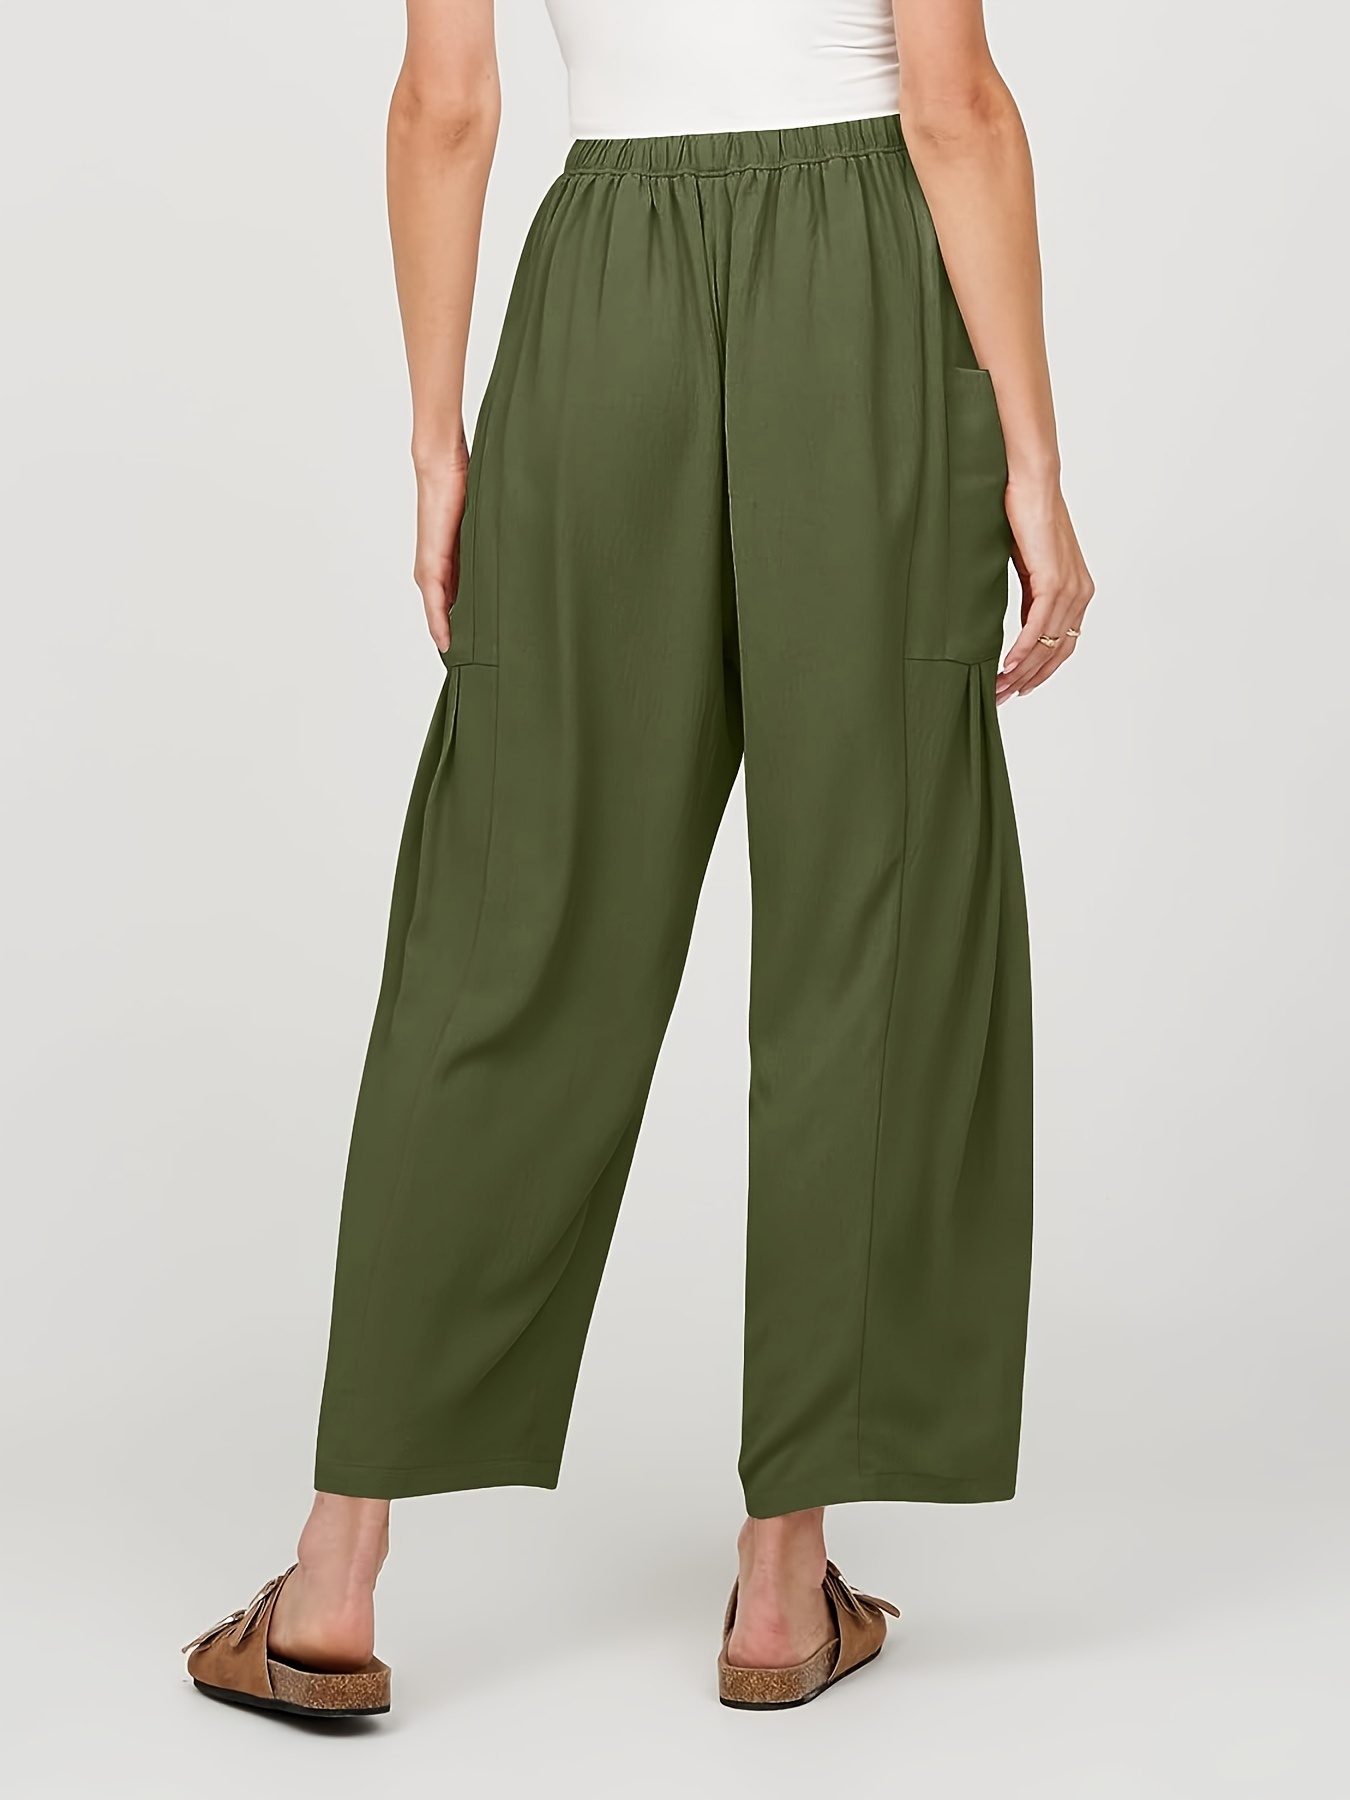 Summer Versatile Womens Cotton Pants Loose Fit, Non Stretch, Waxed Canvas  Drawstring Bag Closure, High Waist, Wide Leg, Two Color Options From  Blossommg, $105.91